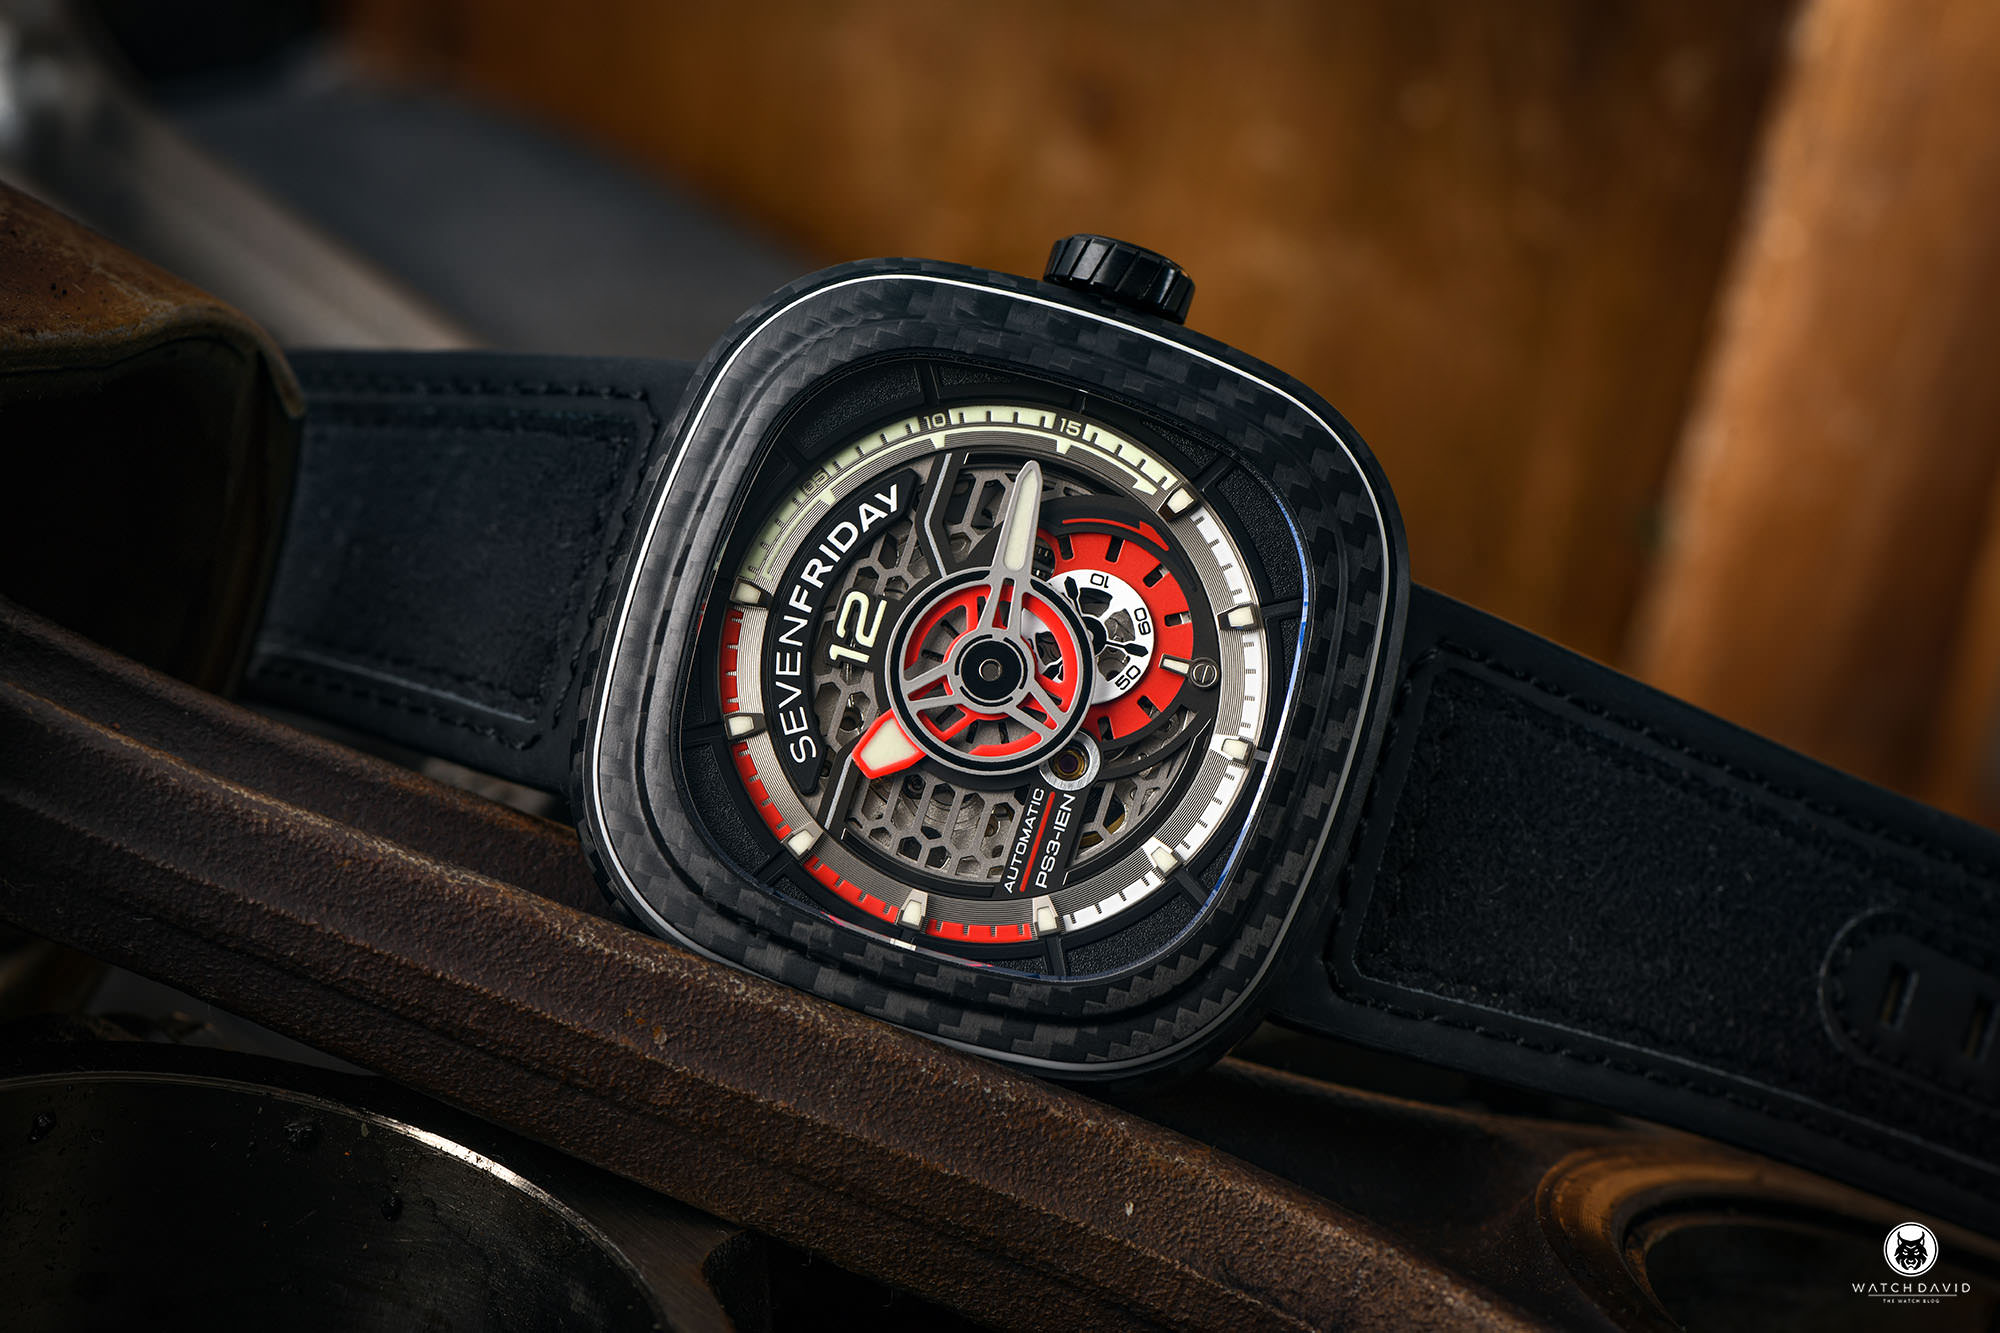 SEVENFRIDAY Carbon PS3/02 Ruby